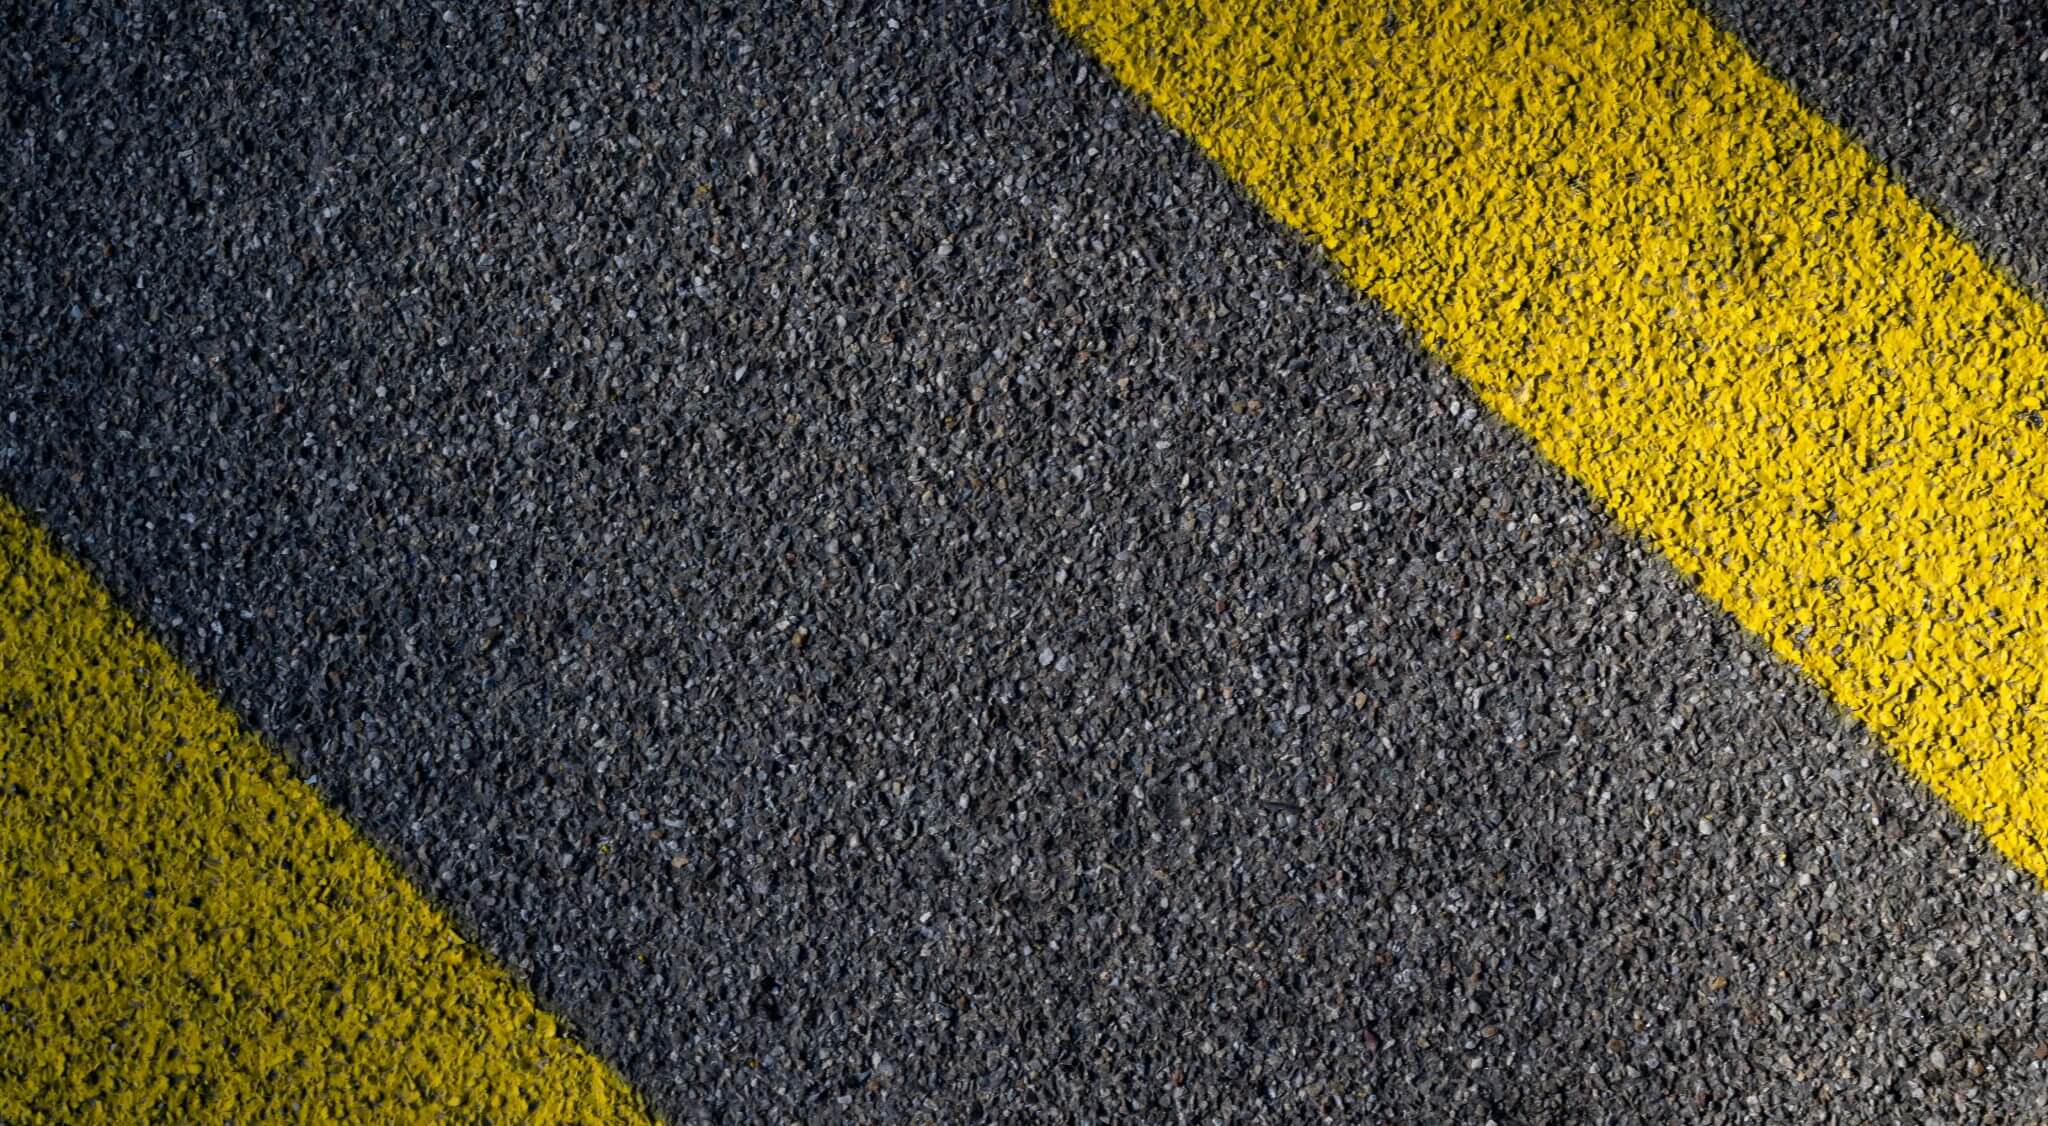 Asphalt parking lot with yellow striping